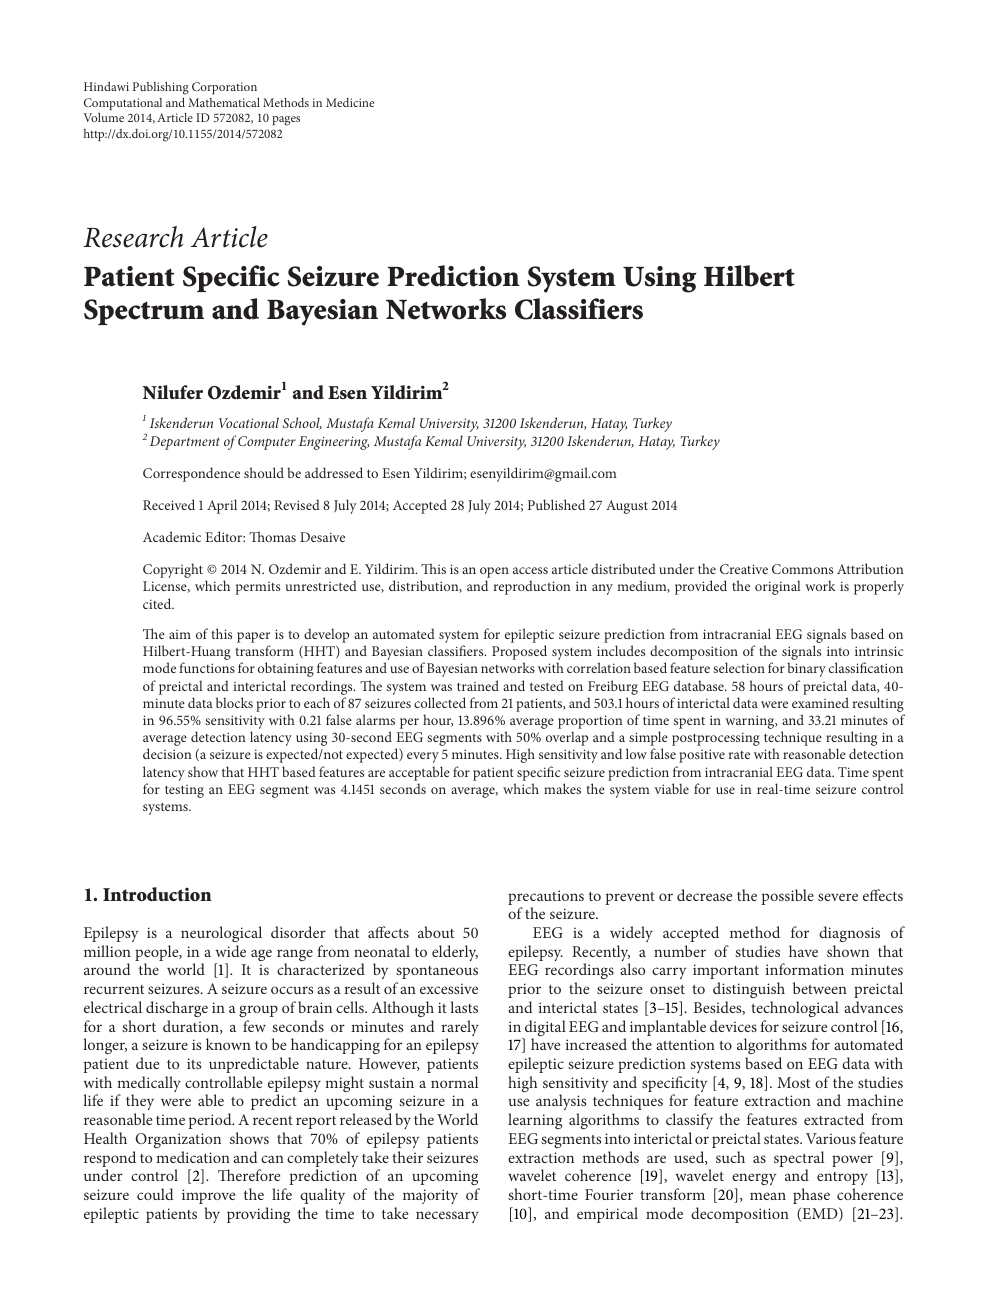 Patient Specific Seizure Prediction System Using Hilbert Spectrum And Bayesian Networks Classifiers Topic Of Research Paper In Medical Engineering Download Scholarly Article Pdf And Read For Free On Cyberleninka Open Science